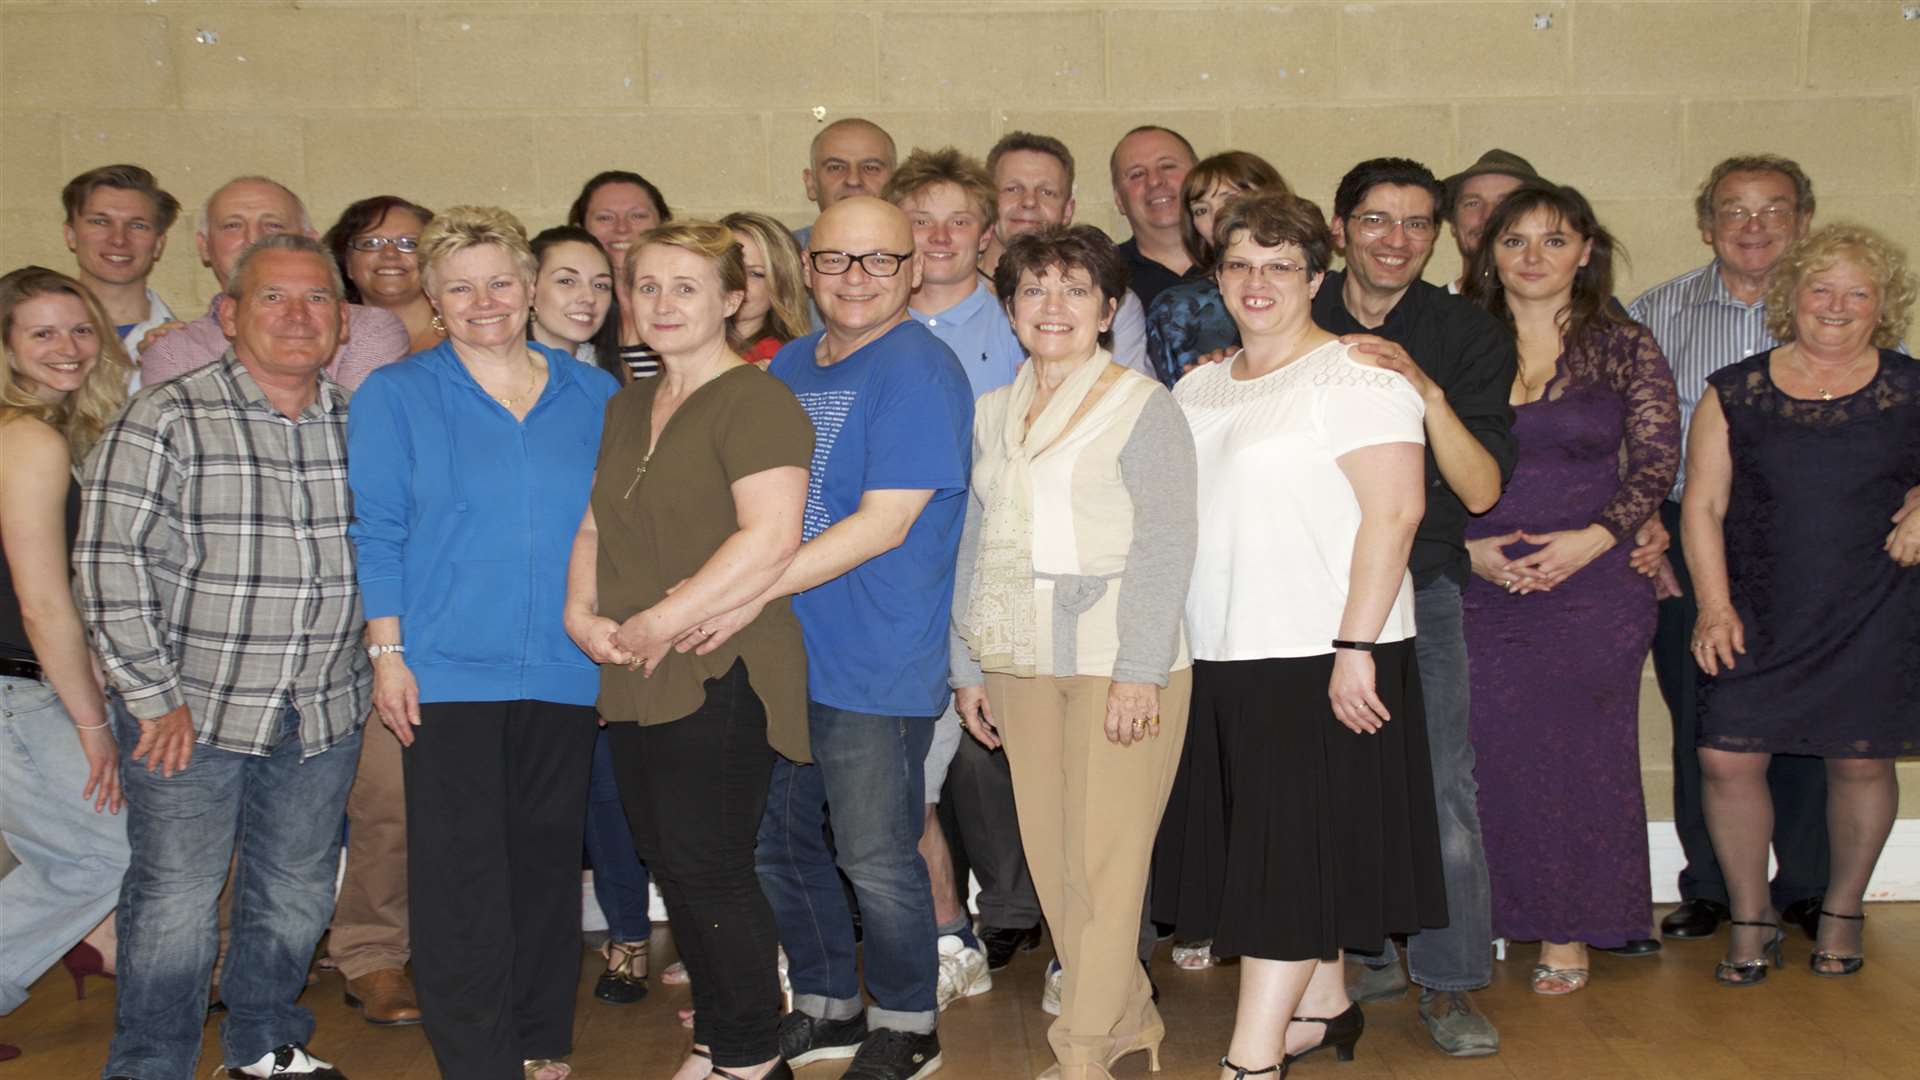 Dancers are ready to take to the floor for the second Strictly Folkestone charity show